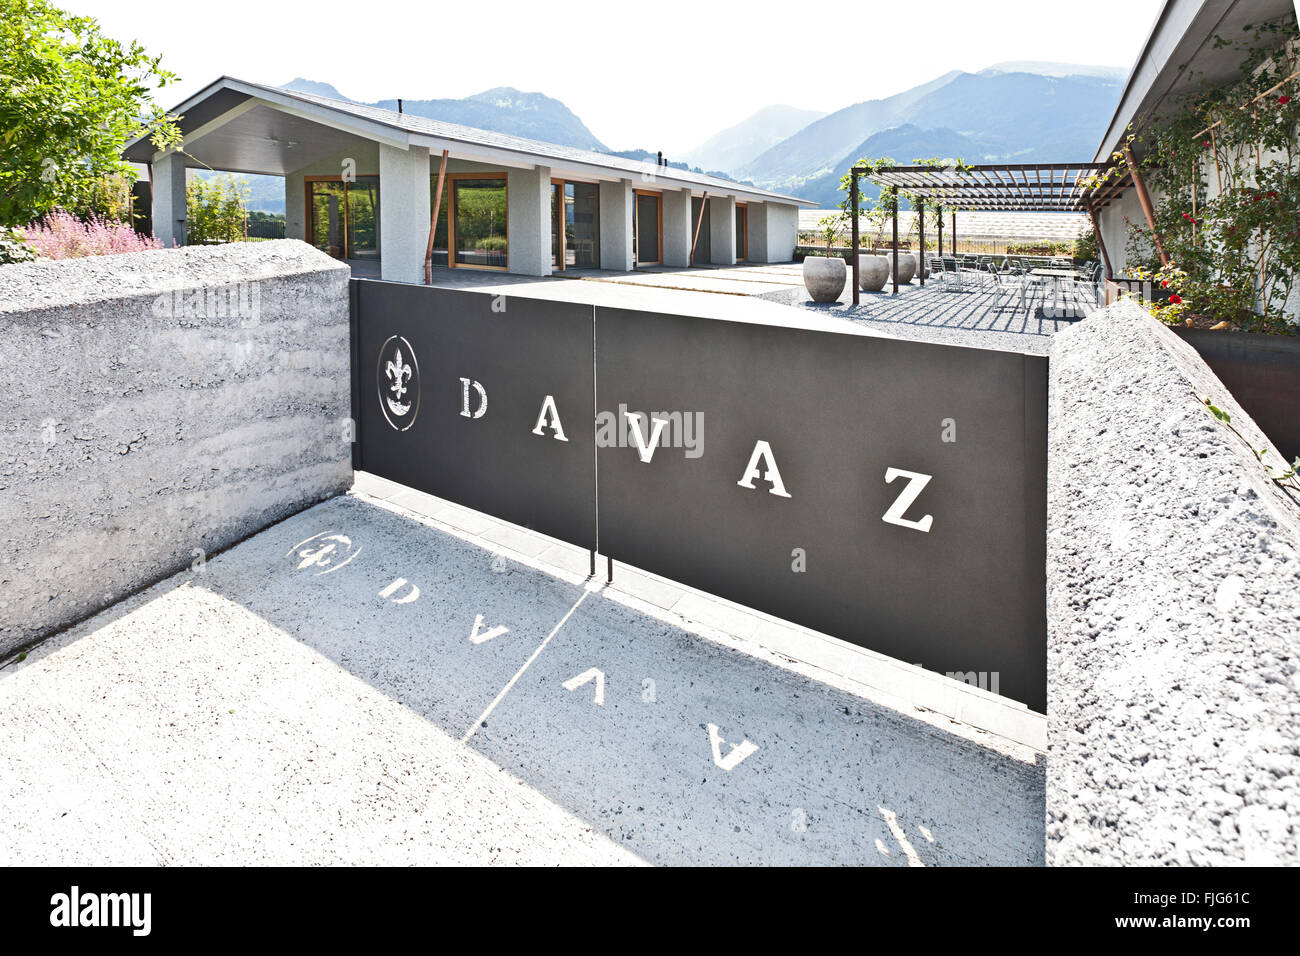 Entrance to the Davaz winery, Fläsch, Canton of Grisons, Switzerland Stock Photo